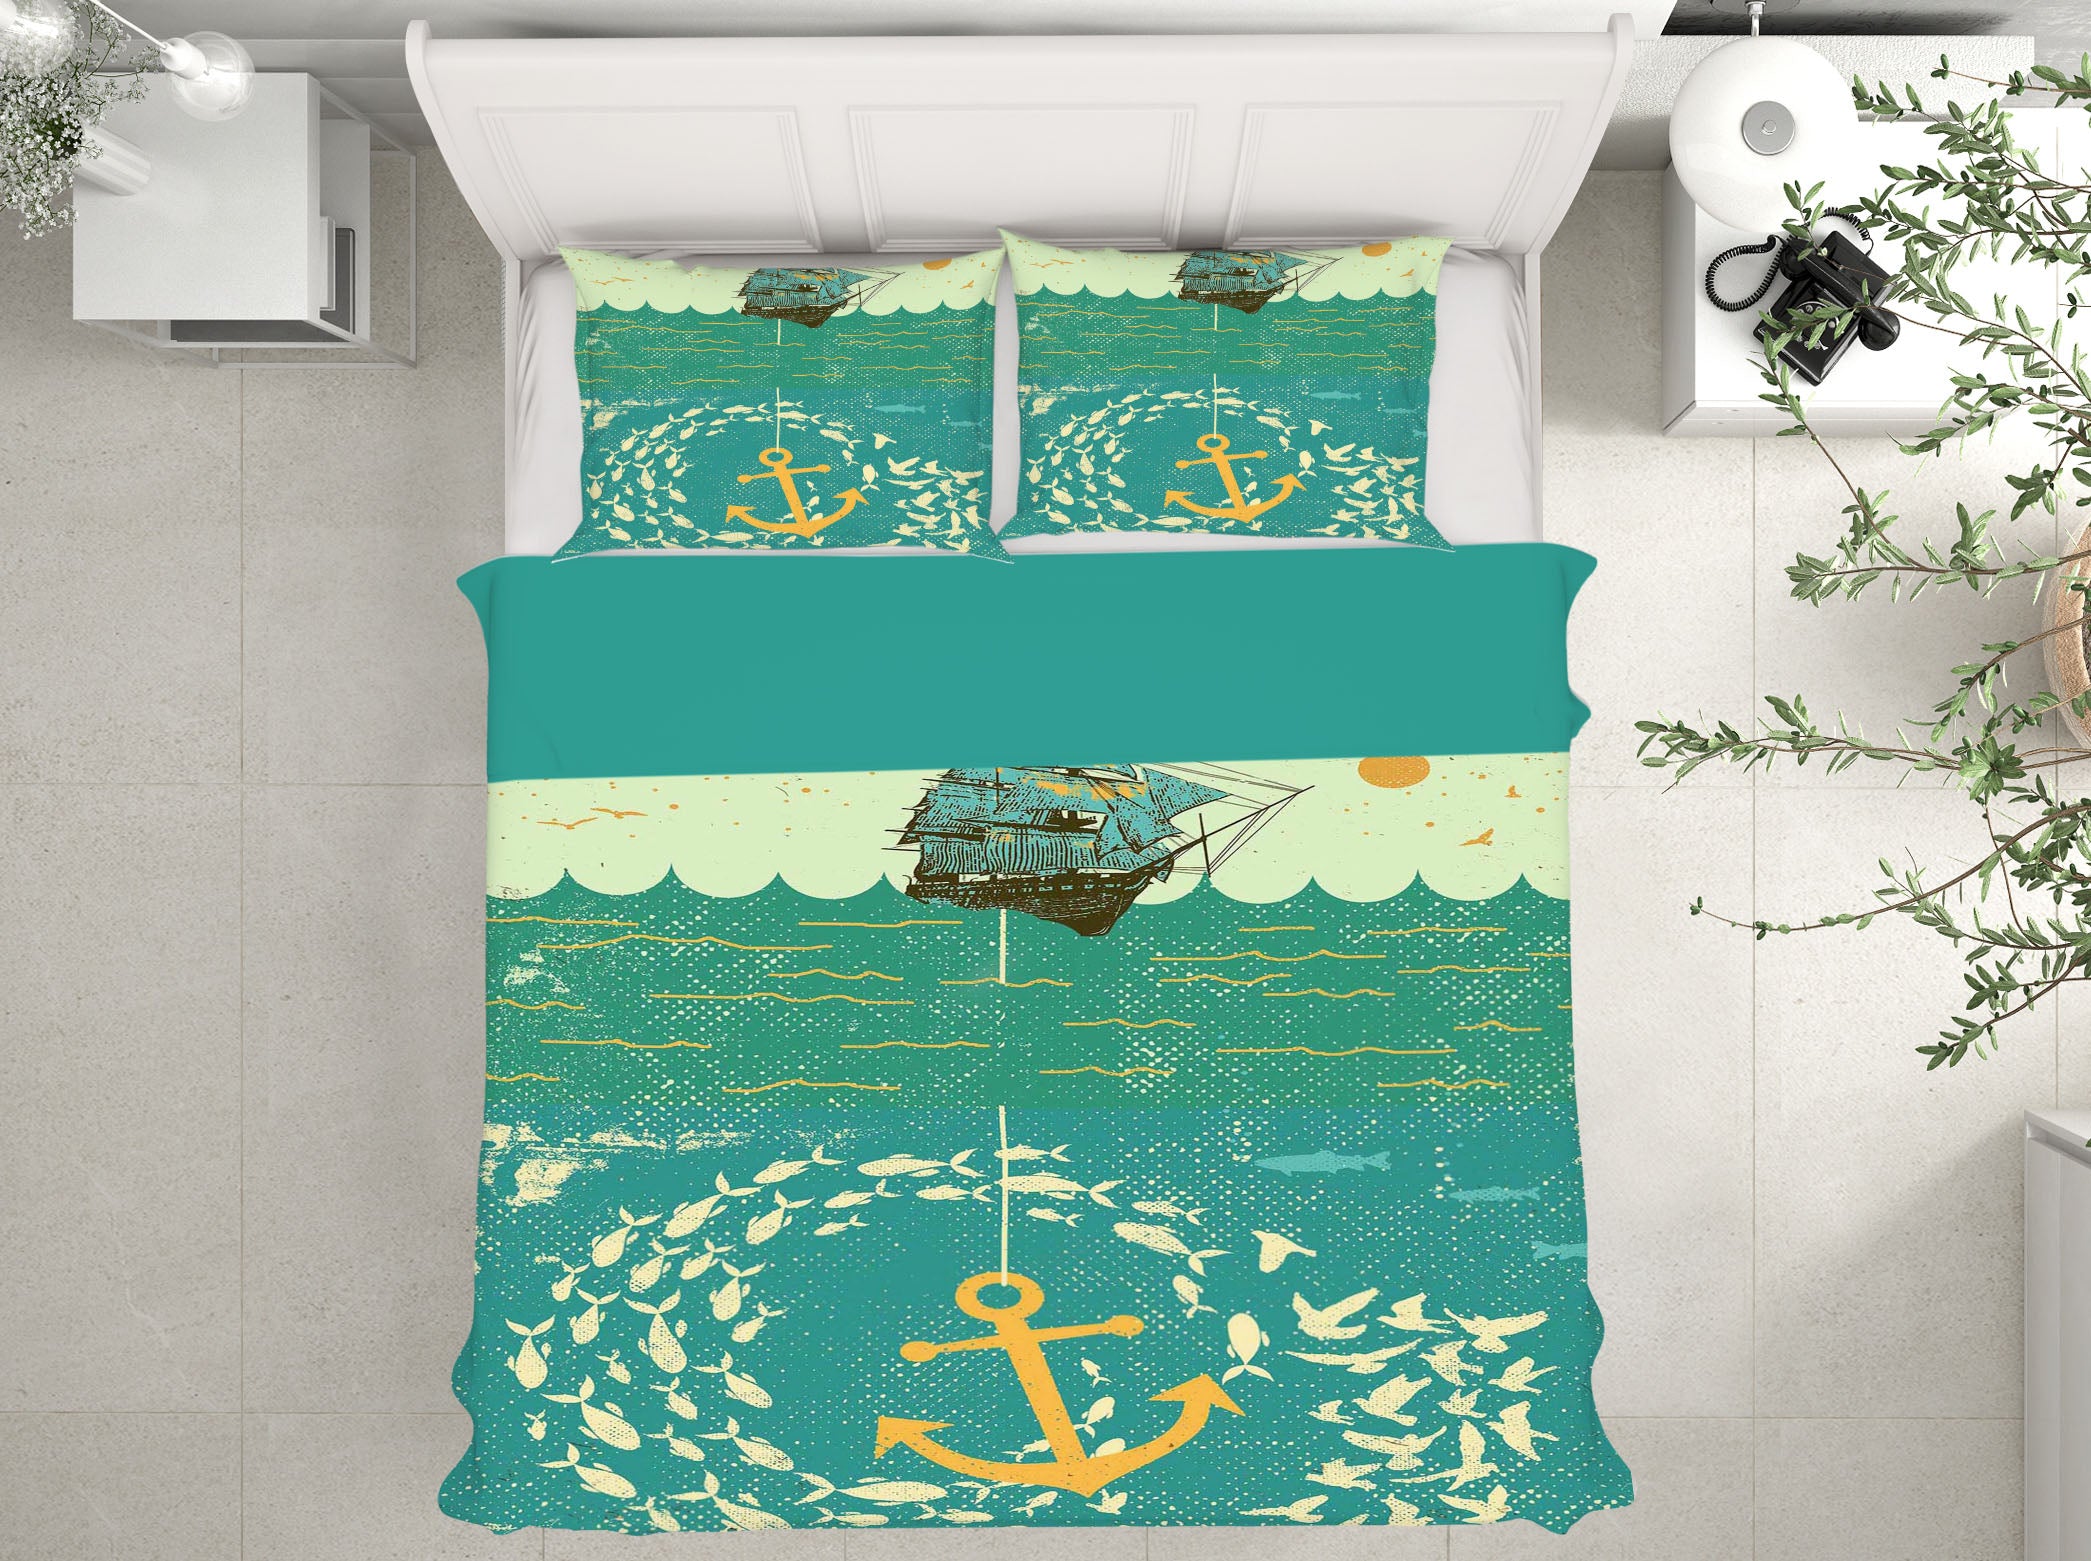 3D School Of Fish 2106 Showdeer Bedding Bed Pillowcases Quilt